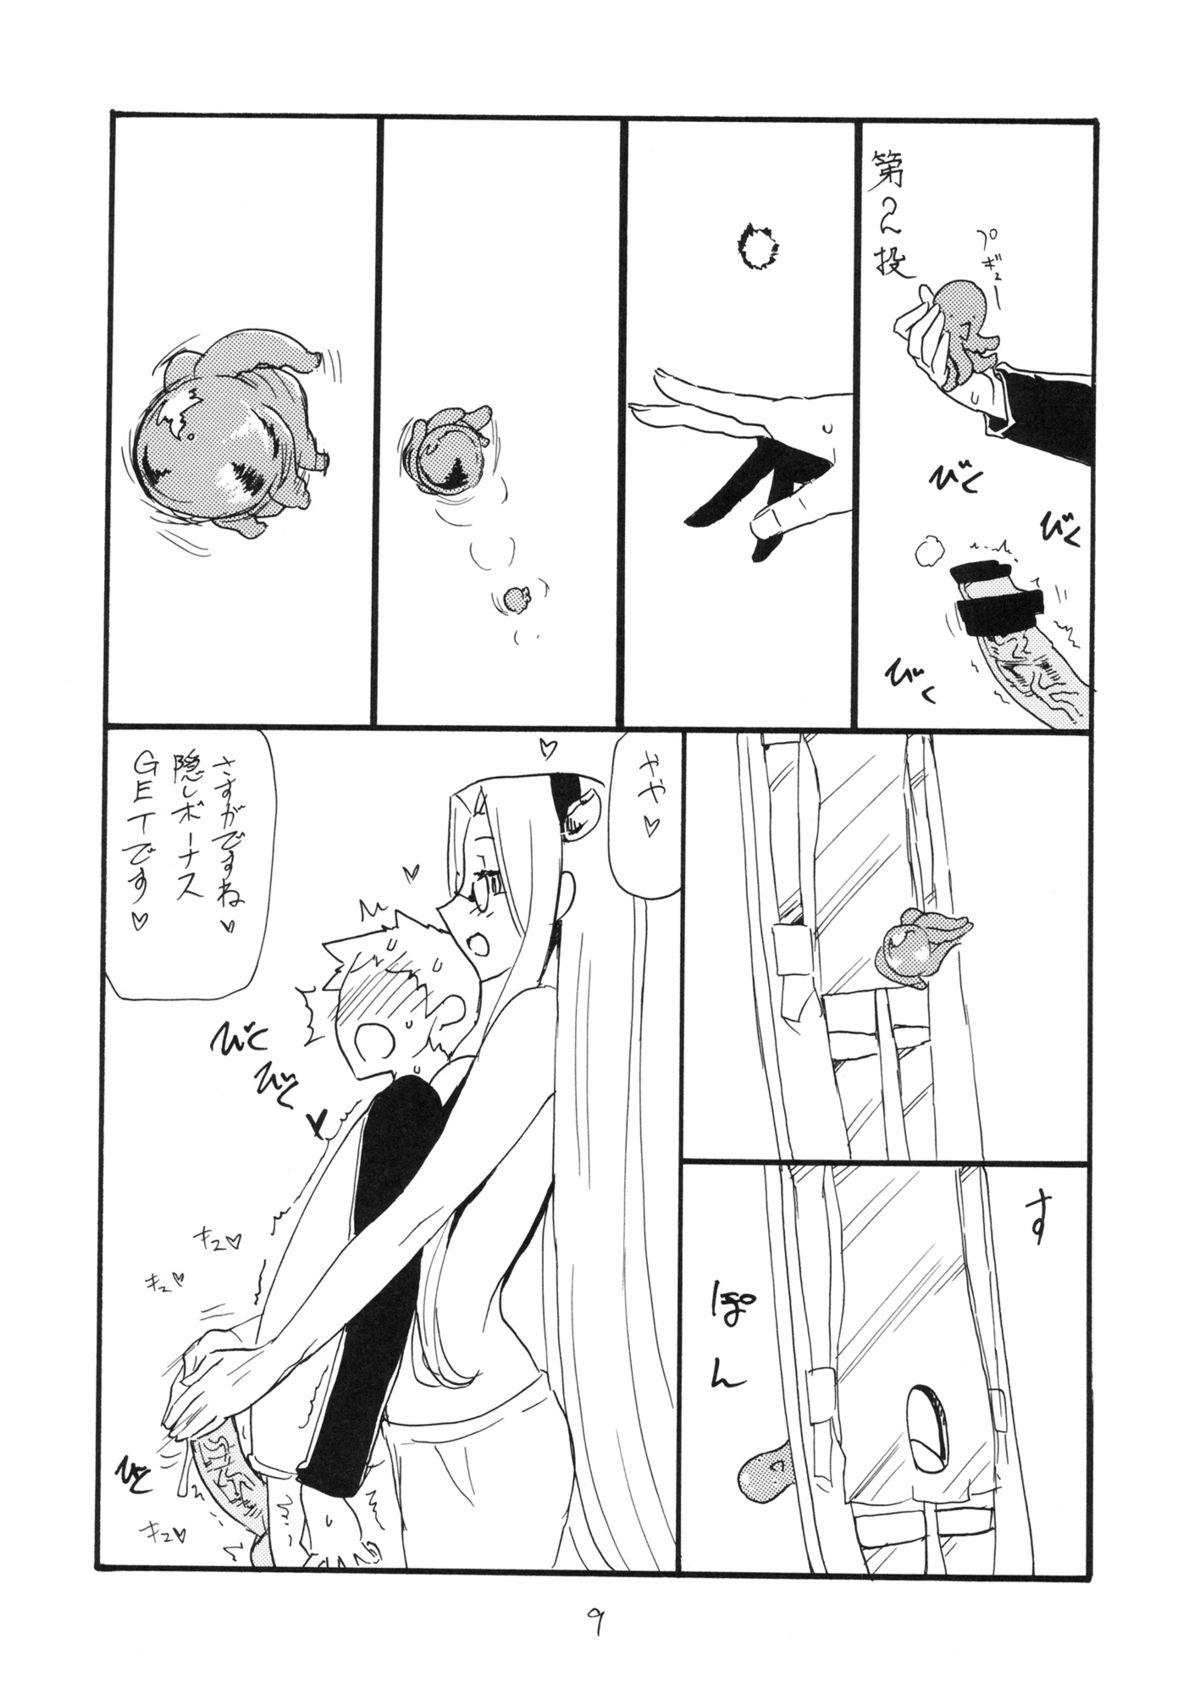 Spandex Usshisshi - Fate stay night Flogging - Page 8